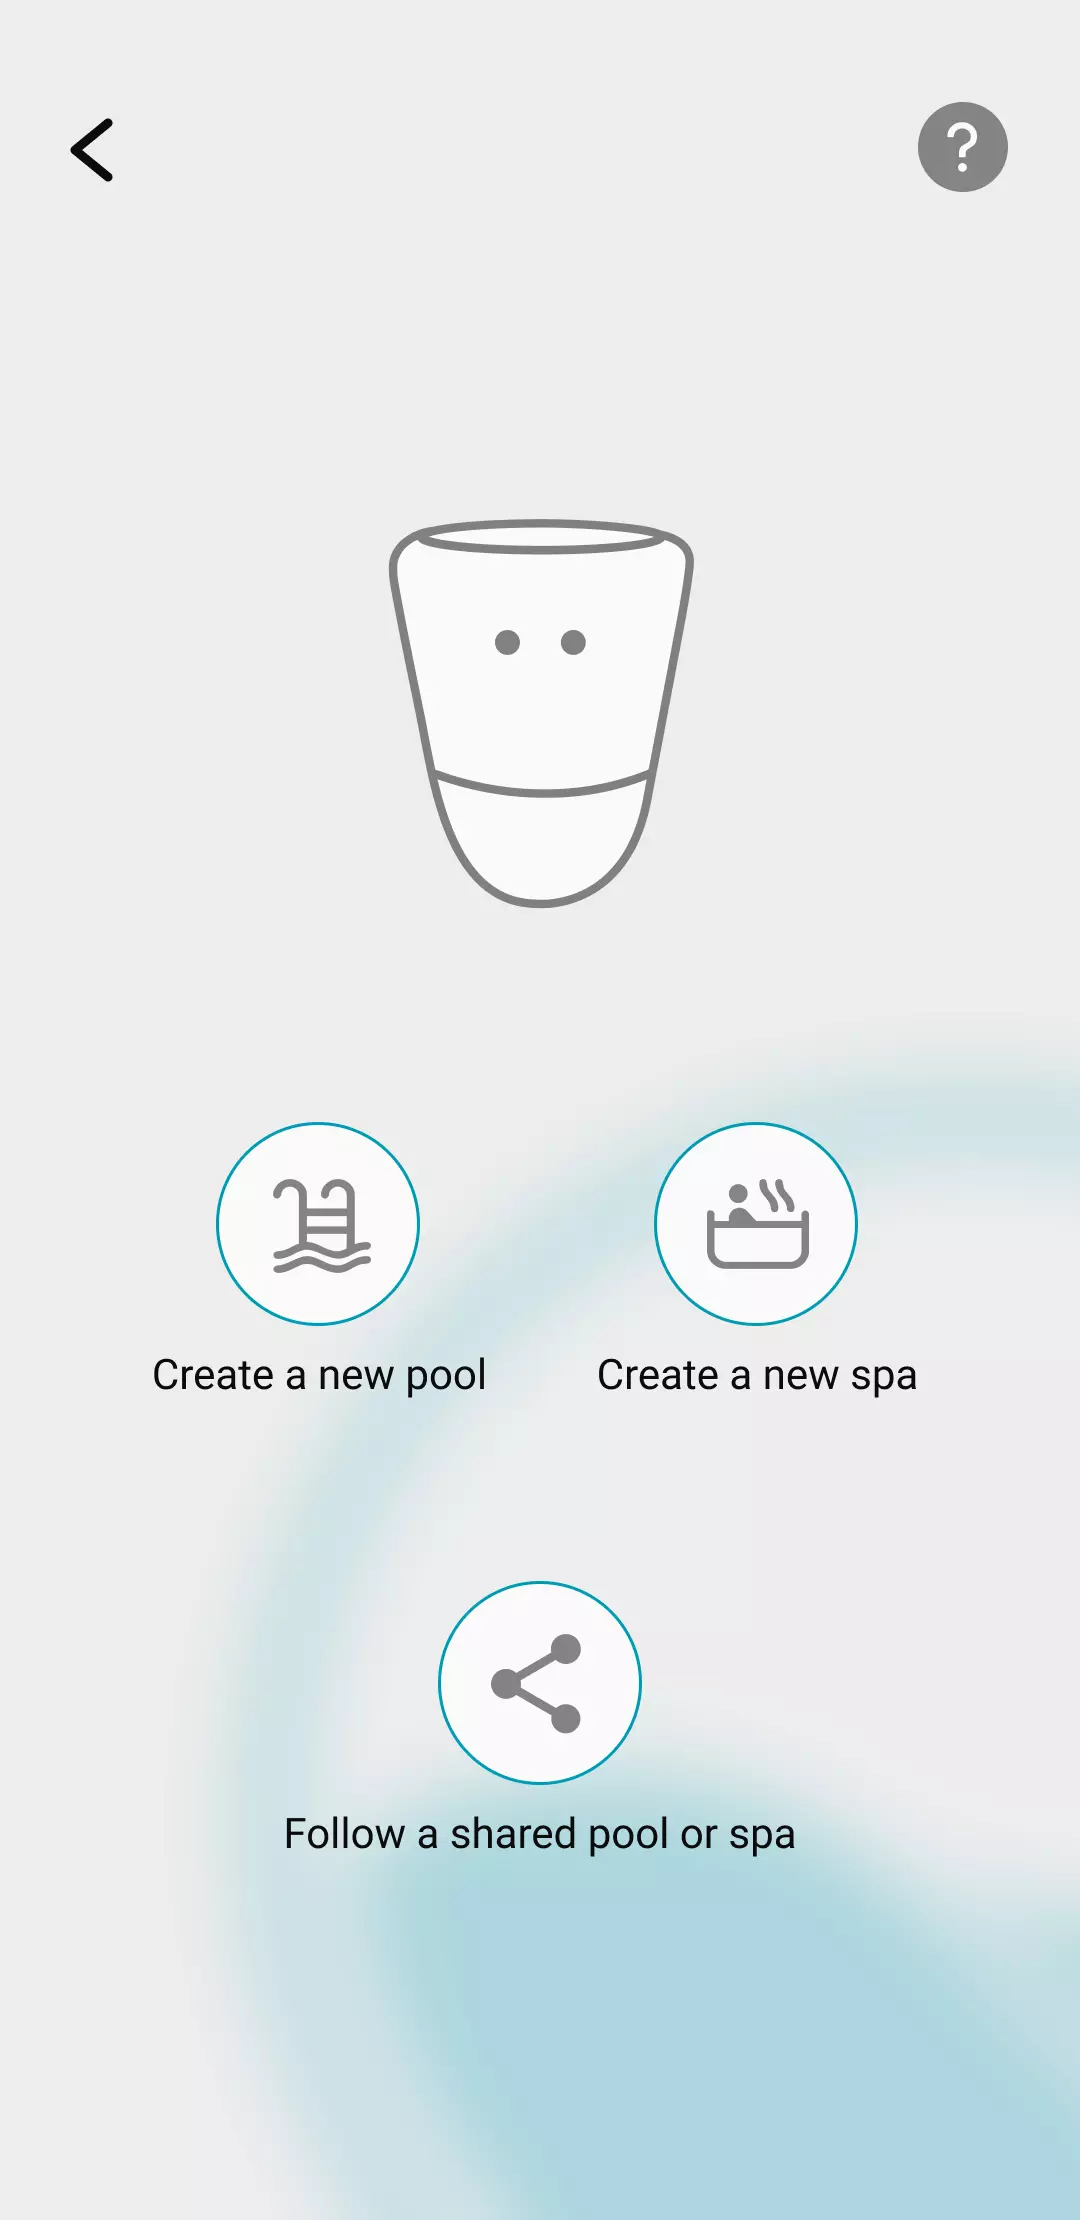 Visual of the ICO application when creating the profile or the user must say if he creates this profile for a new pool or spa, but also follow a shared pool or spa